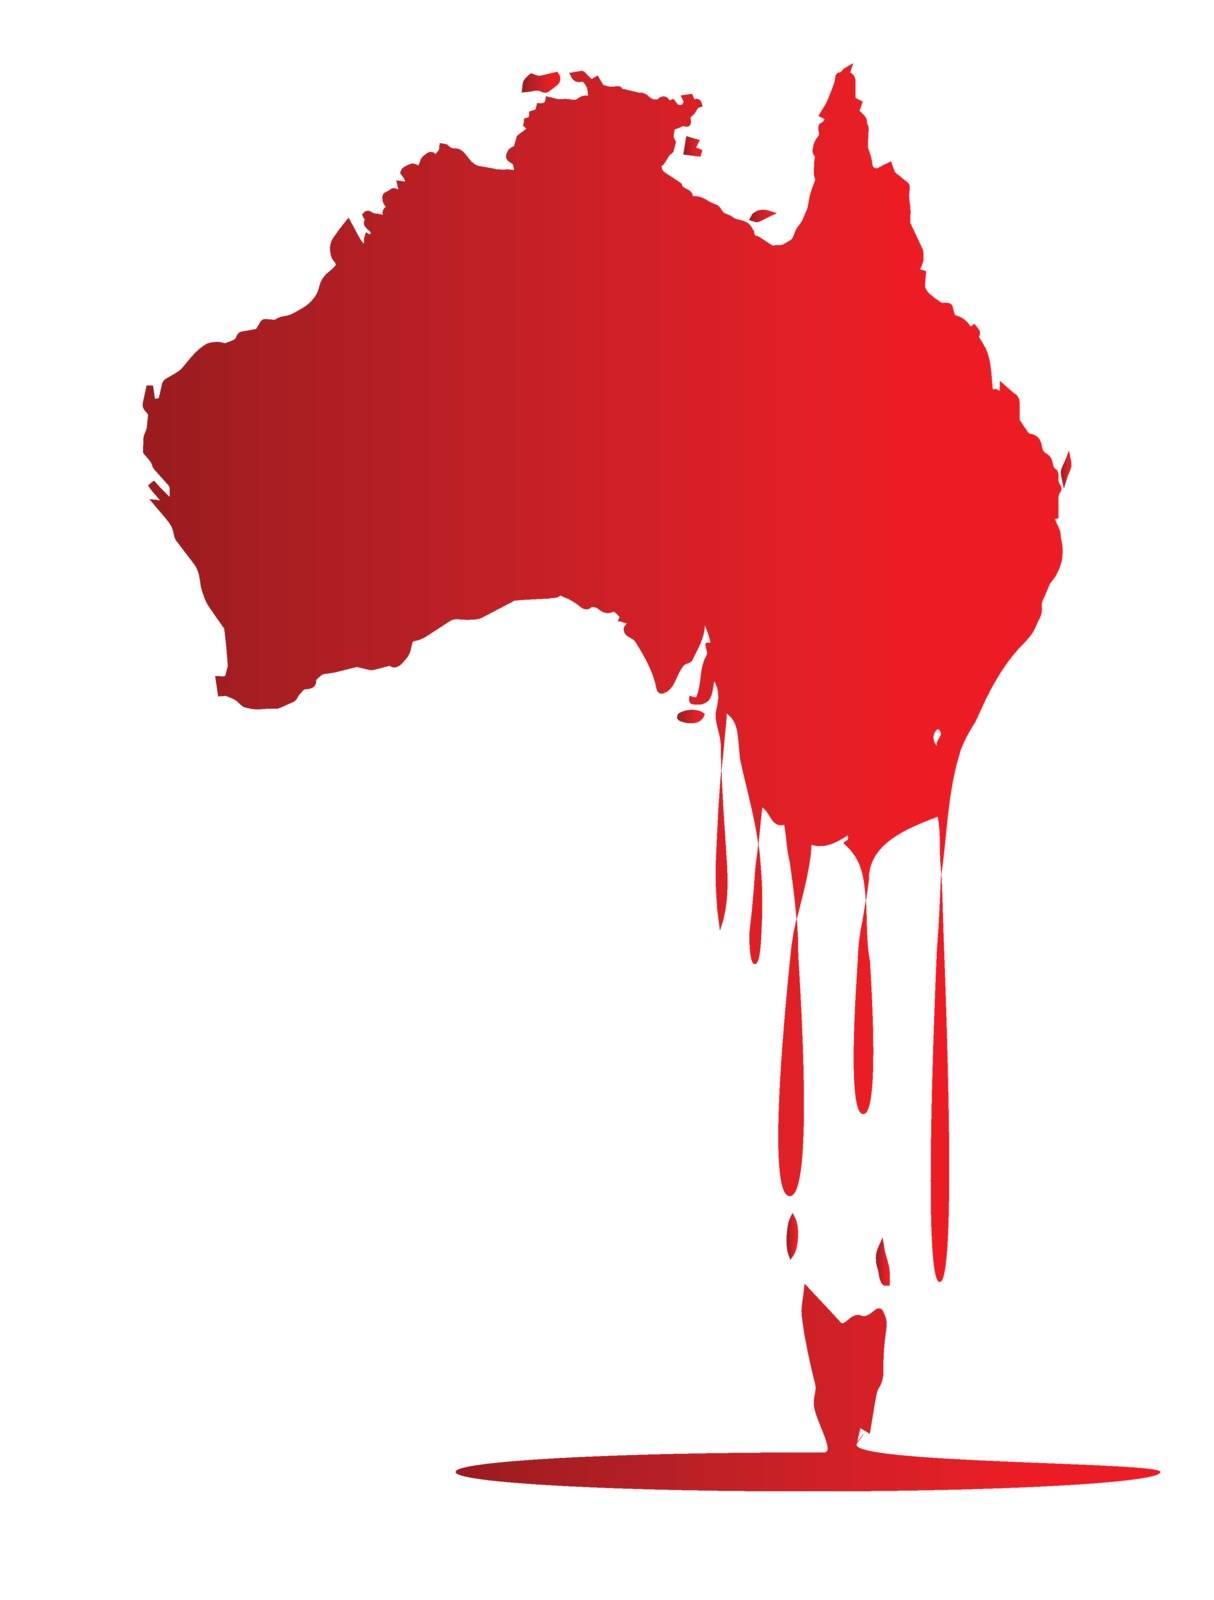 Silhouette map of Australia melting into a red puddle of wax